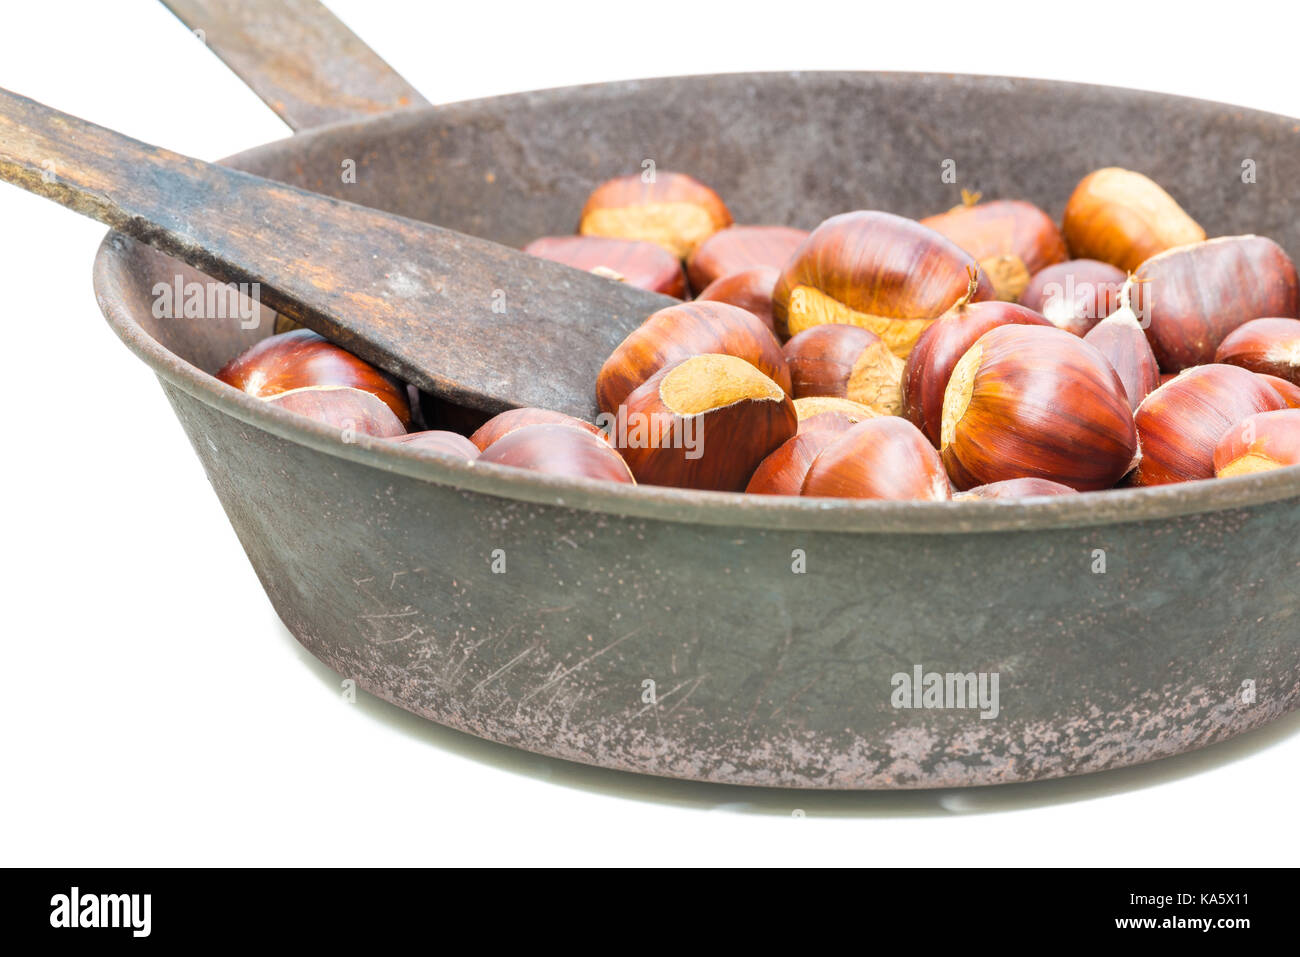 Chestnuts. Characteristic autumn fruit on white background. Fresh chestnuts in a old frying pan with holes on the bottom Stock Photo